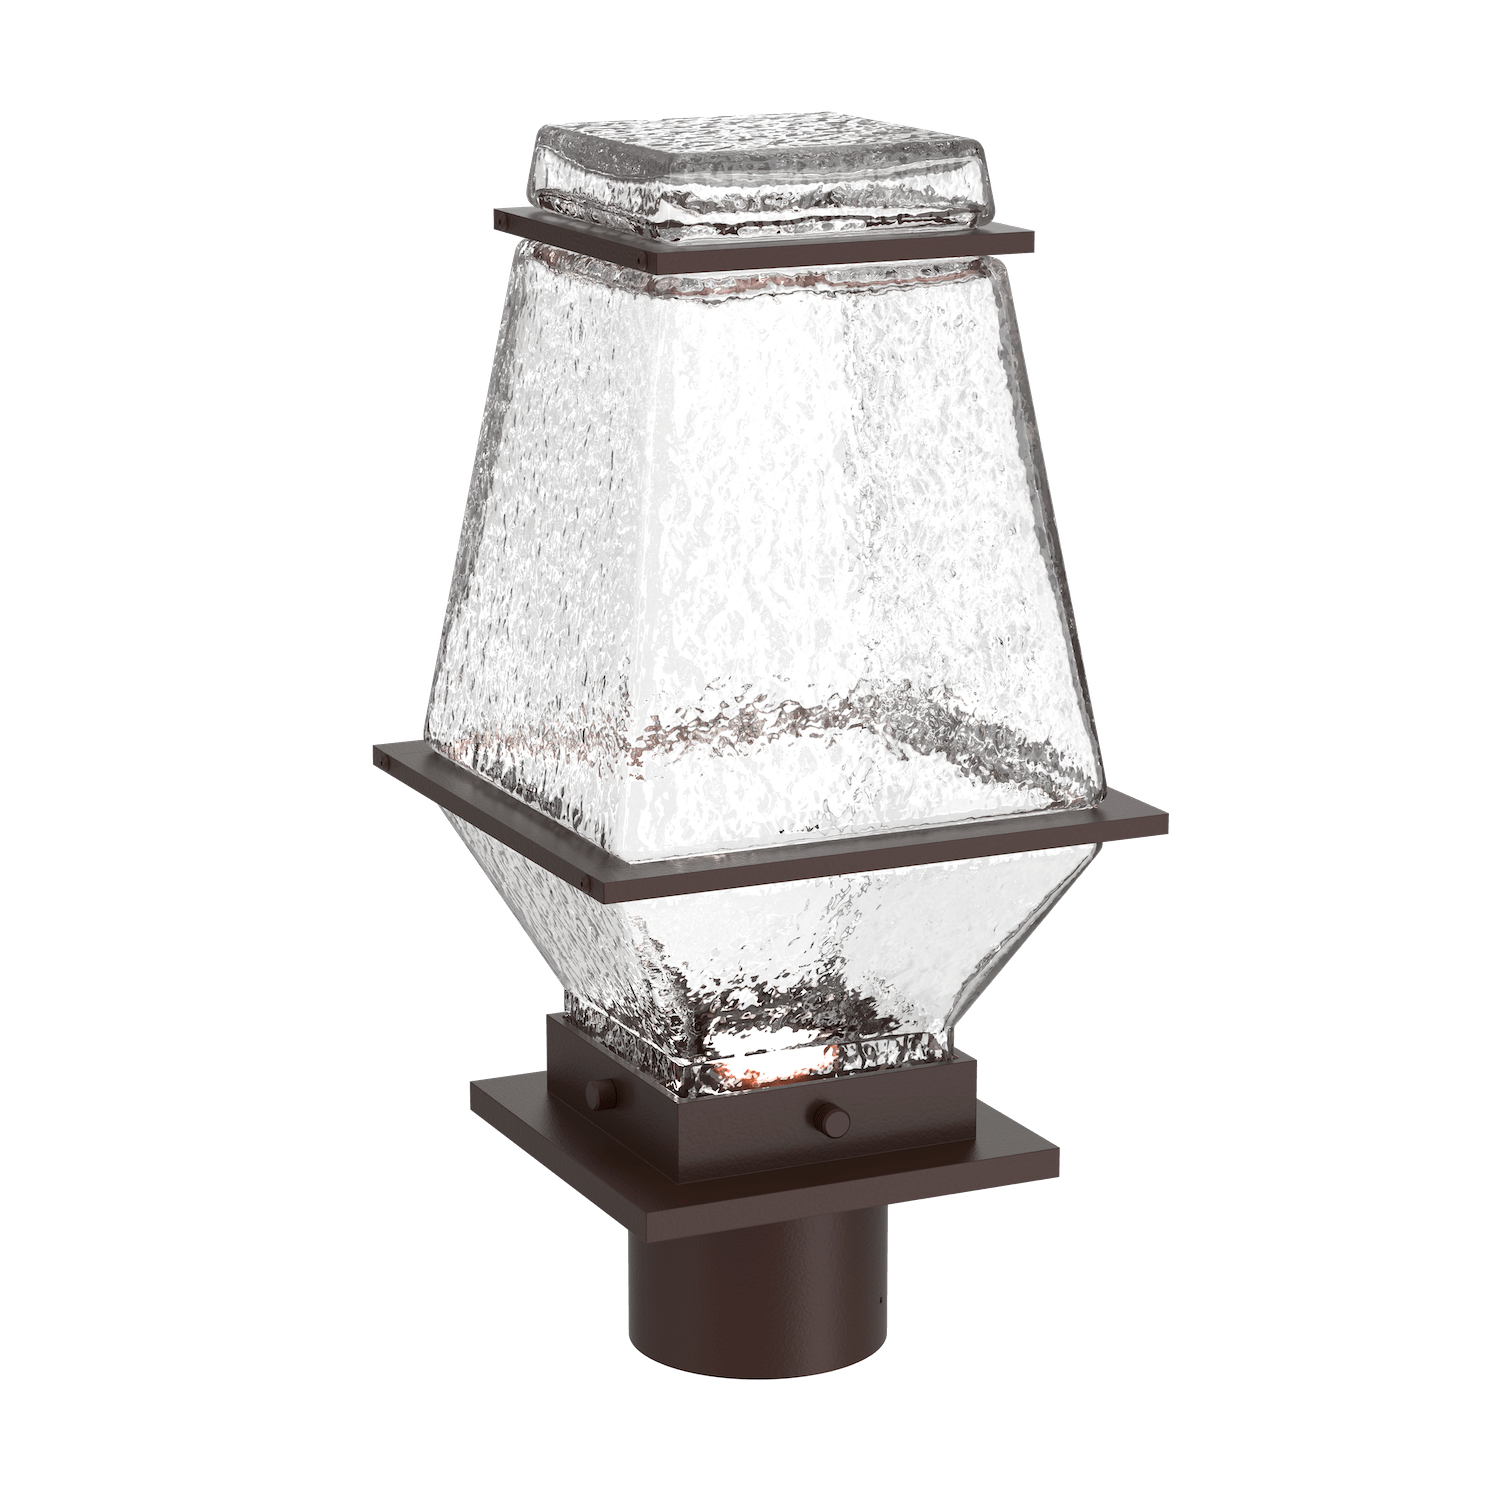 OMB0077-02-SB-C-Hammerton-Studio-Landmark-16-inch-postmount-light-with-statuary-bronze-finish-and-clear-blown-glass-shades-and-LED-lamping